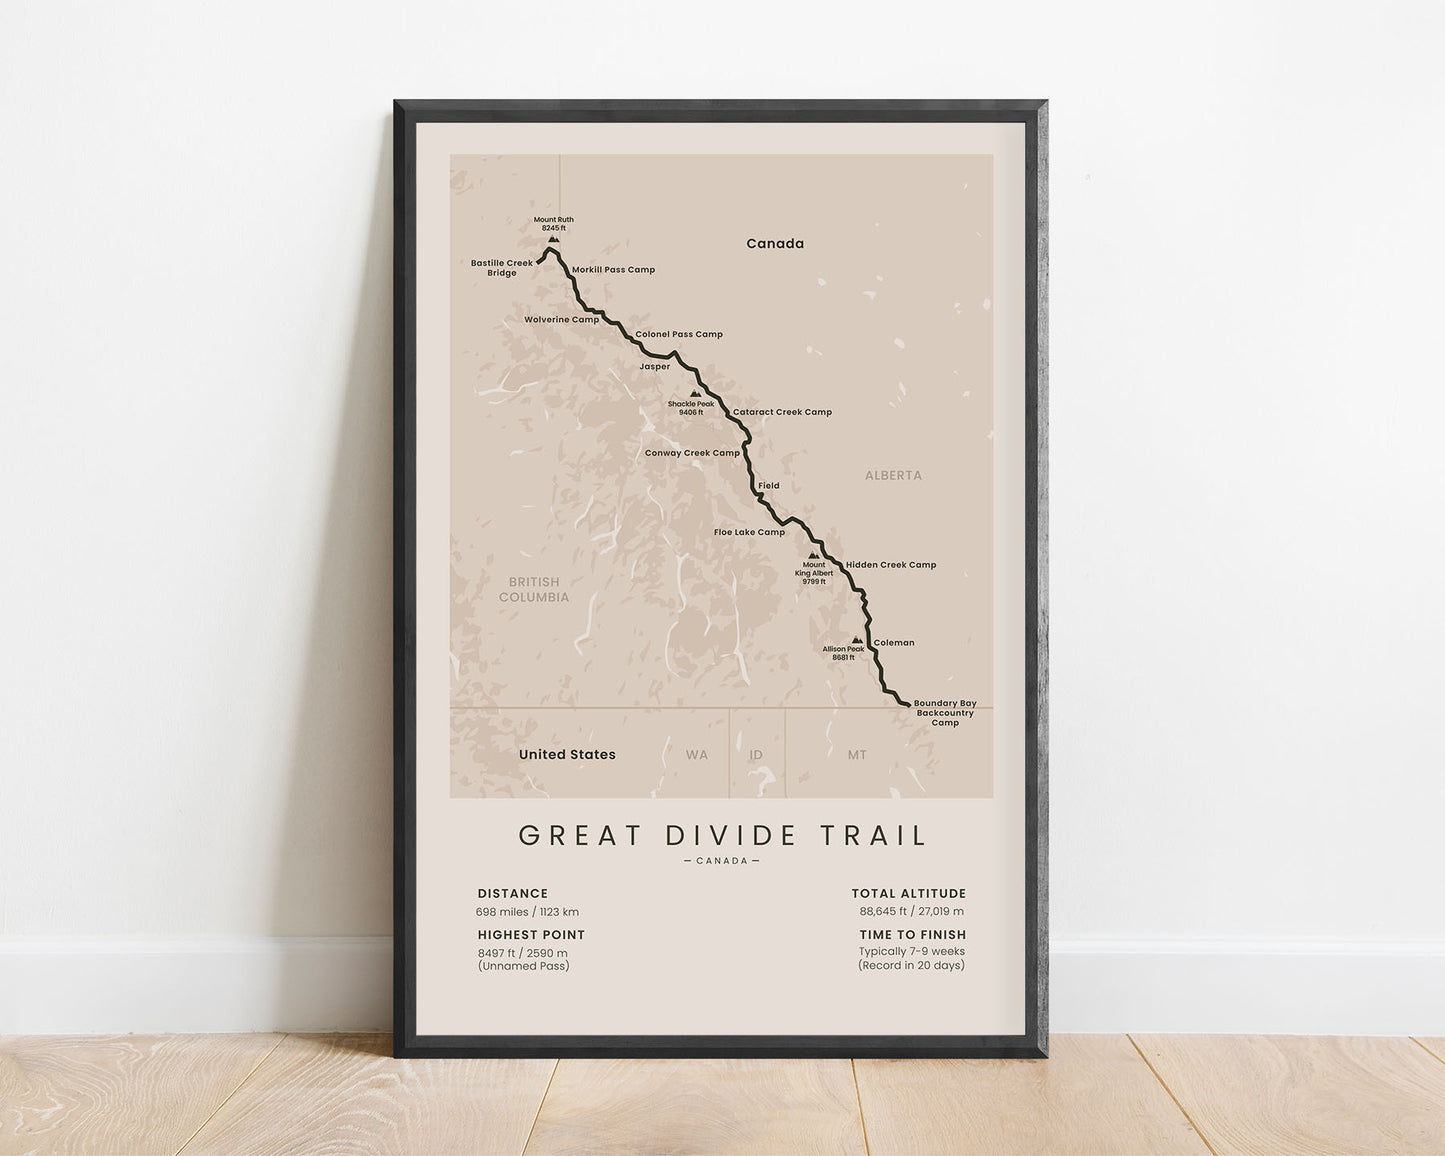 GDT (Alberta) hike wall art with beige background